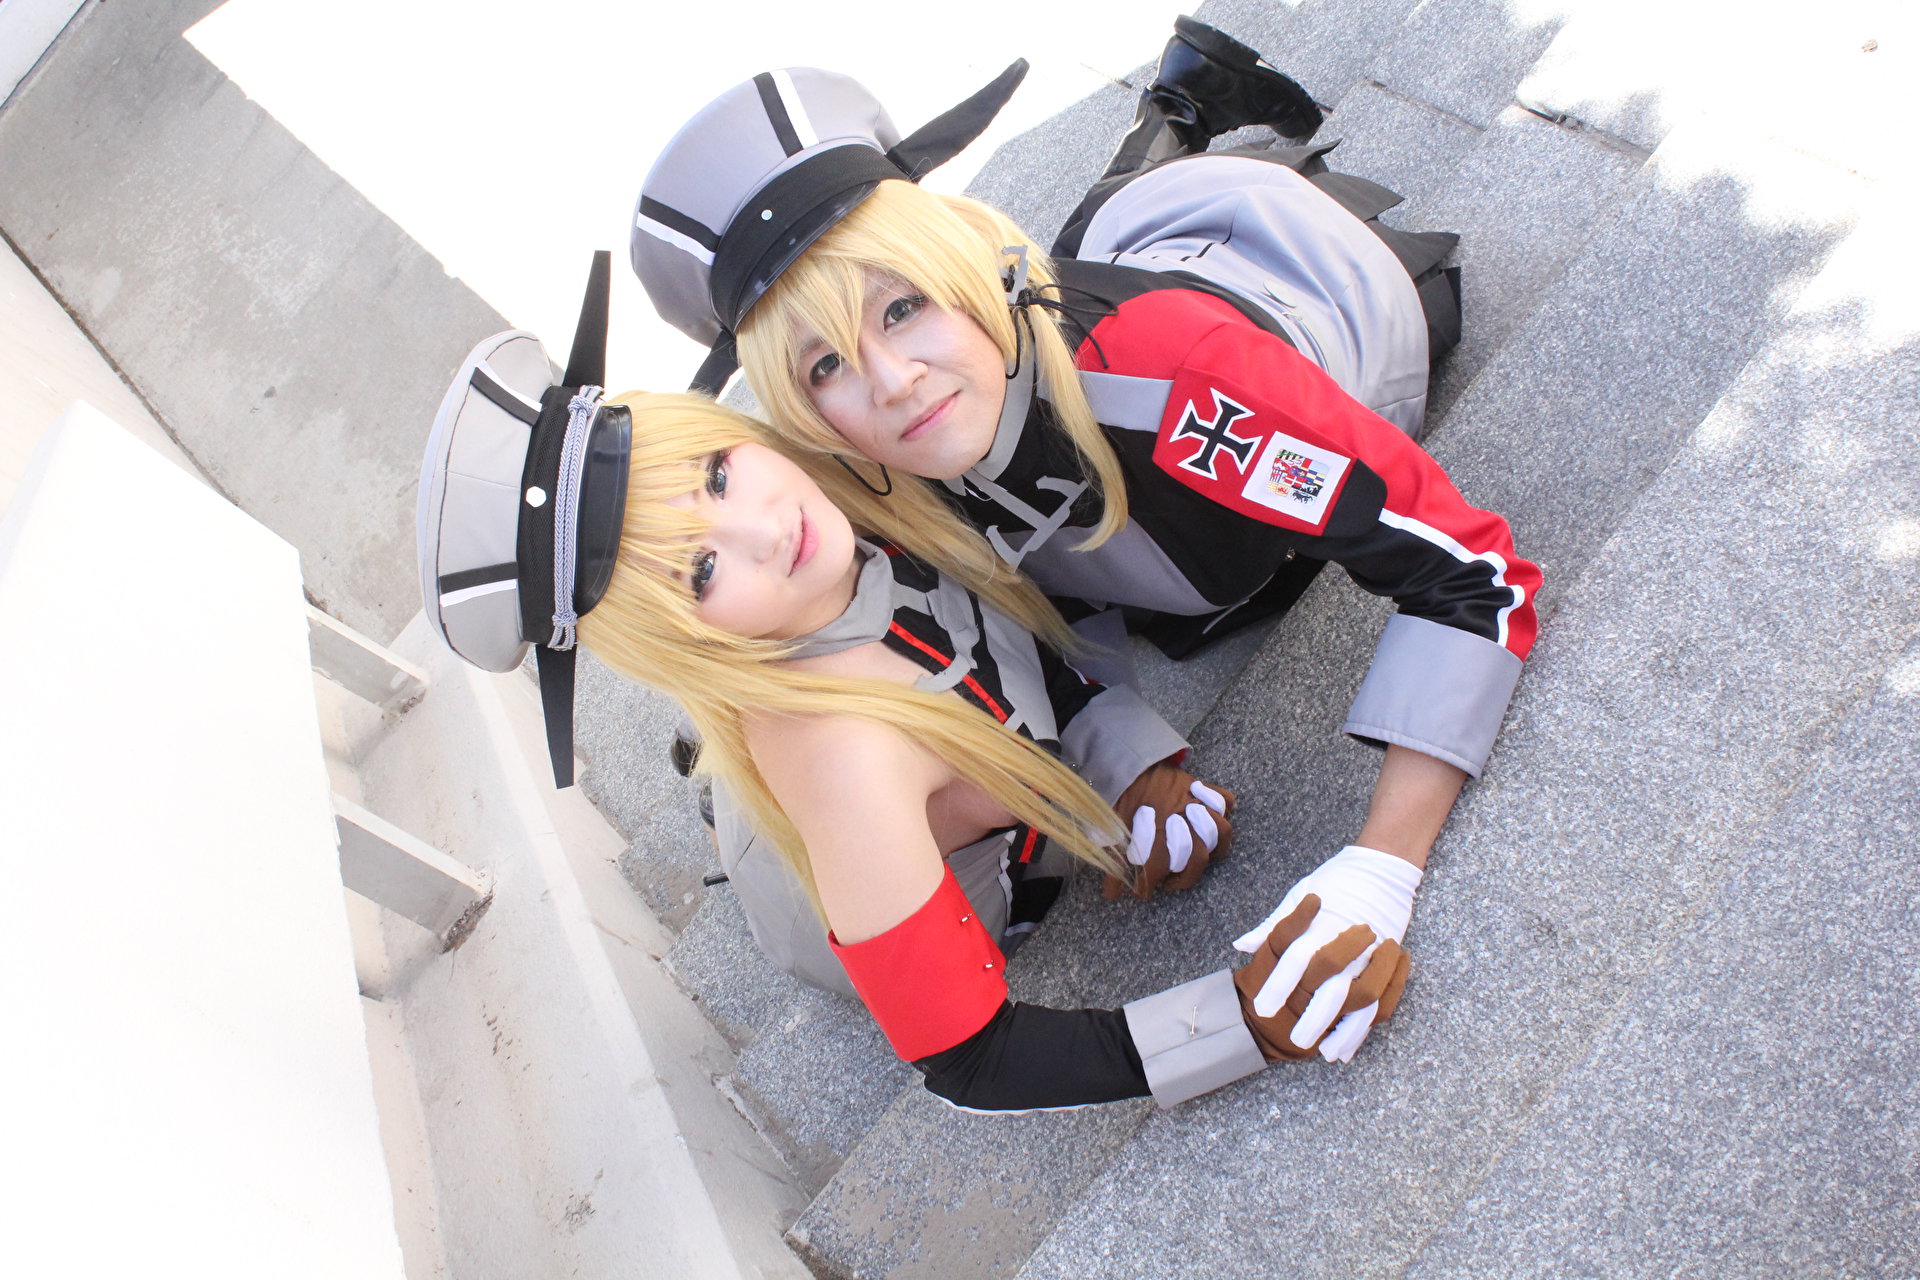 Cospix.net photo featuring Spufflez and Kagamine Nico